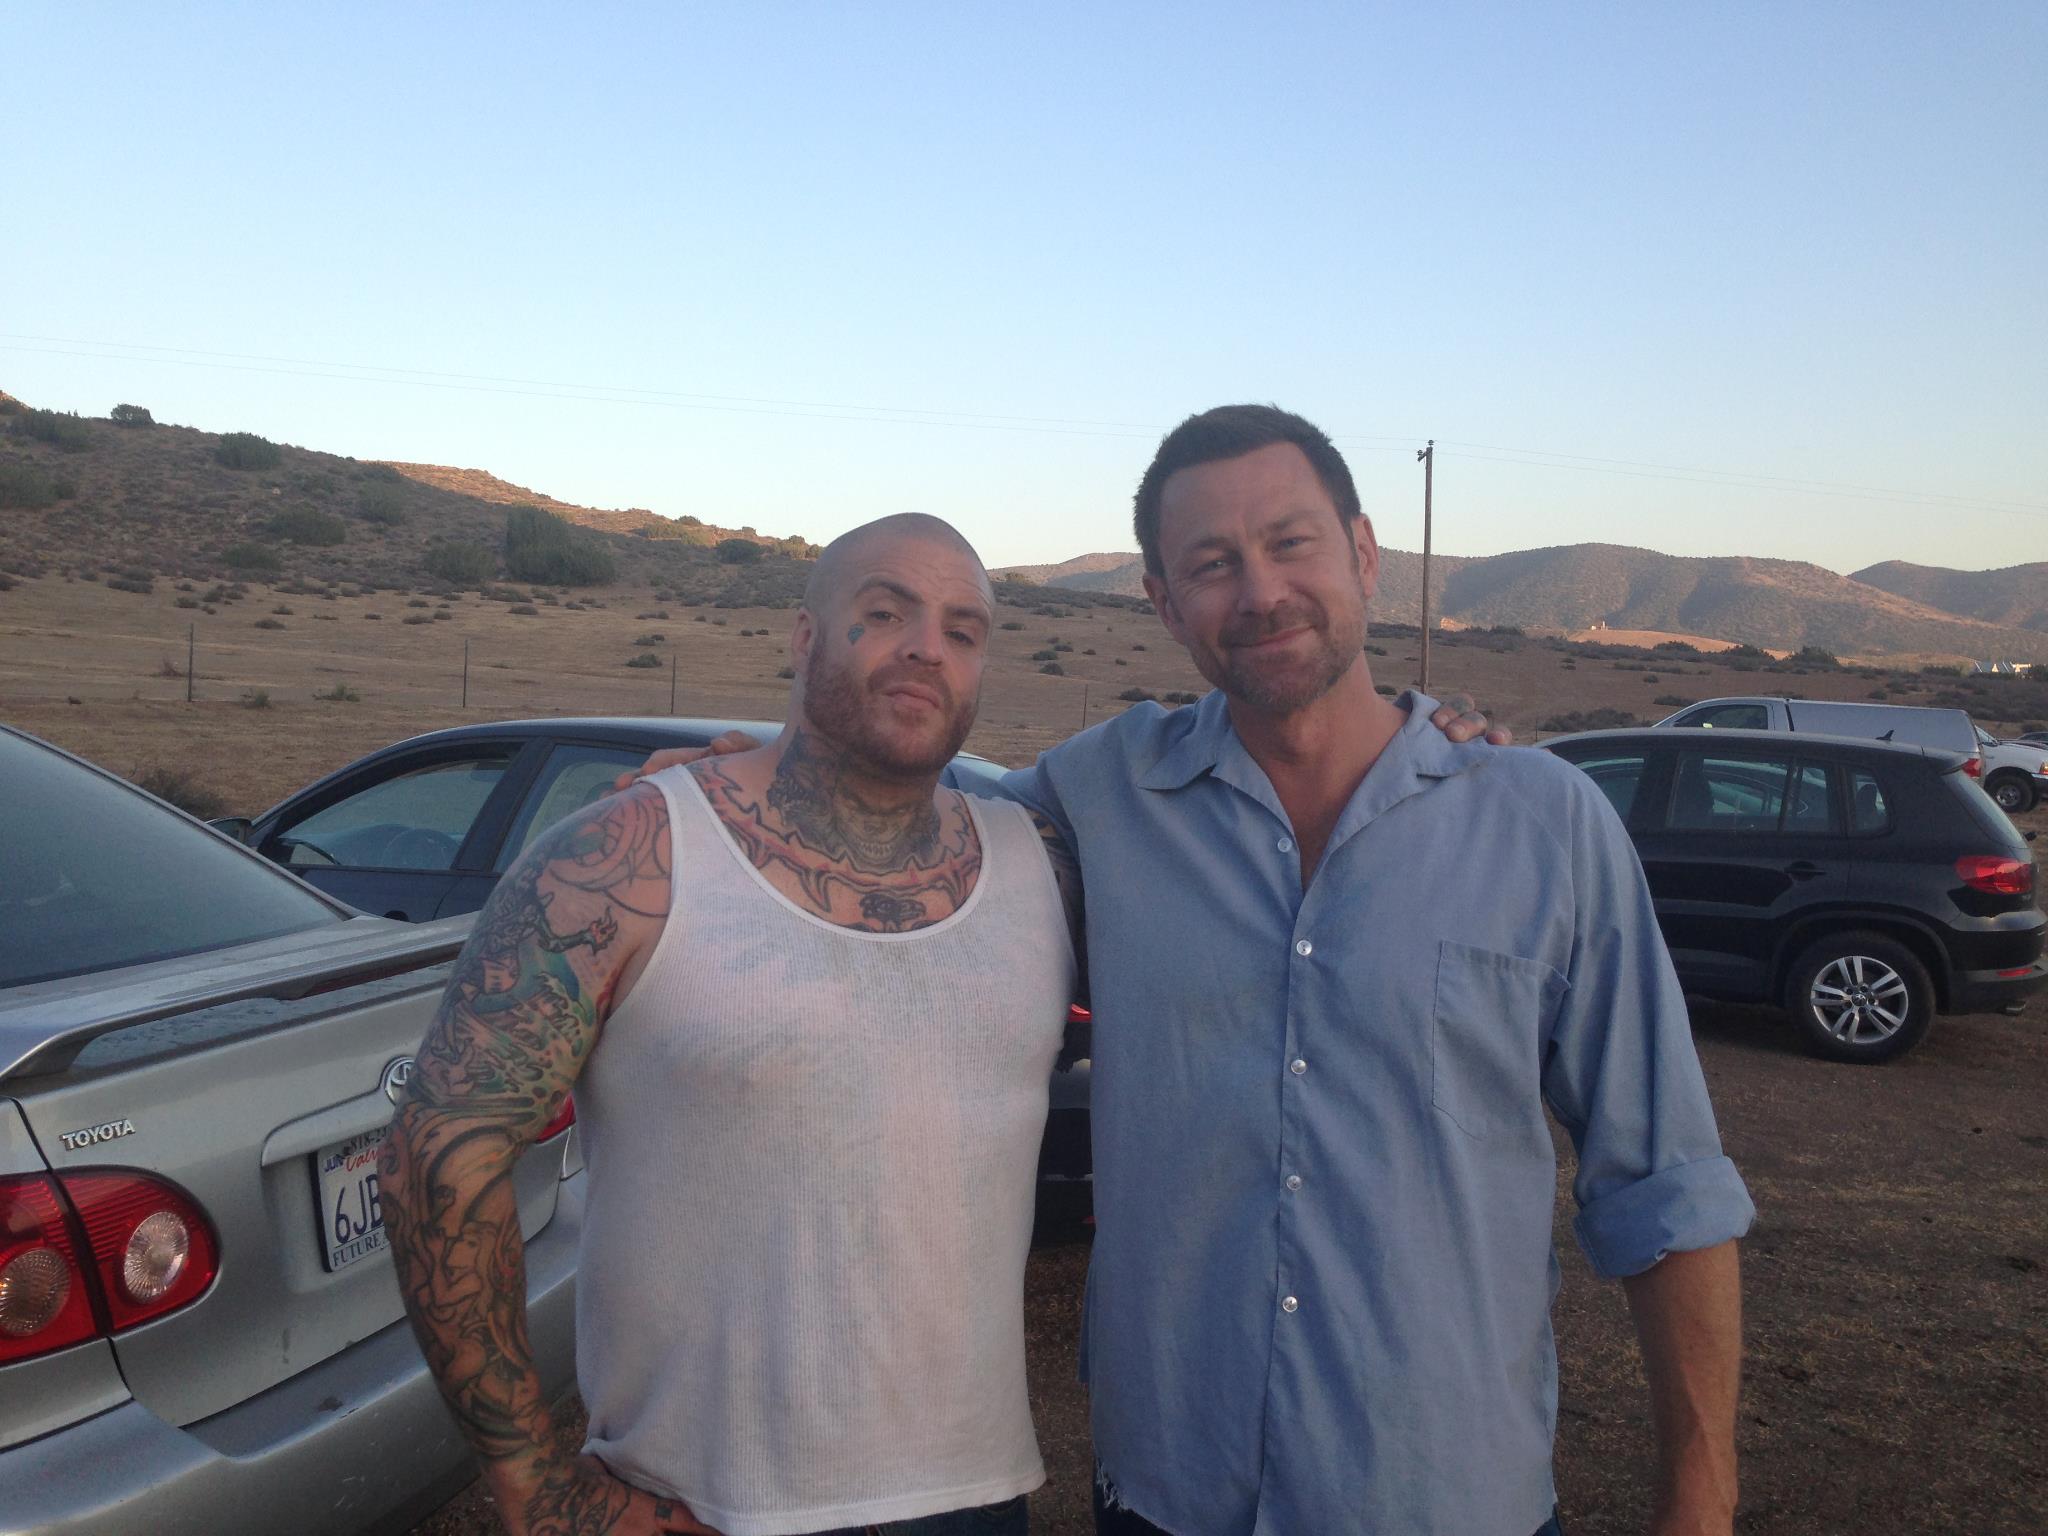 Special thanks to Grant Bowler for breaking me out of jail.